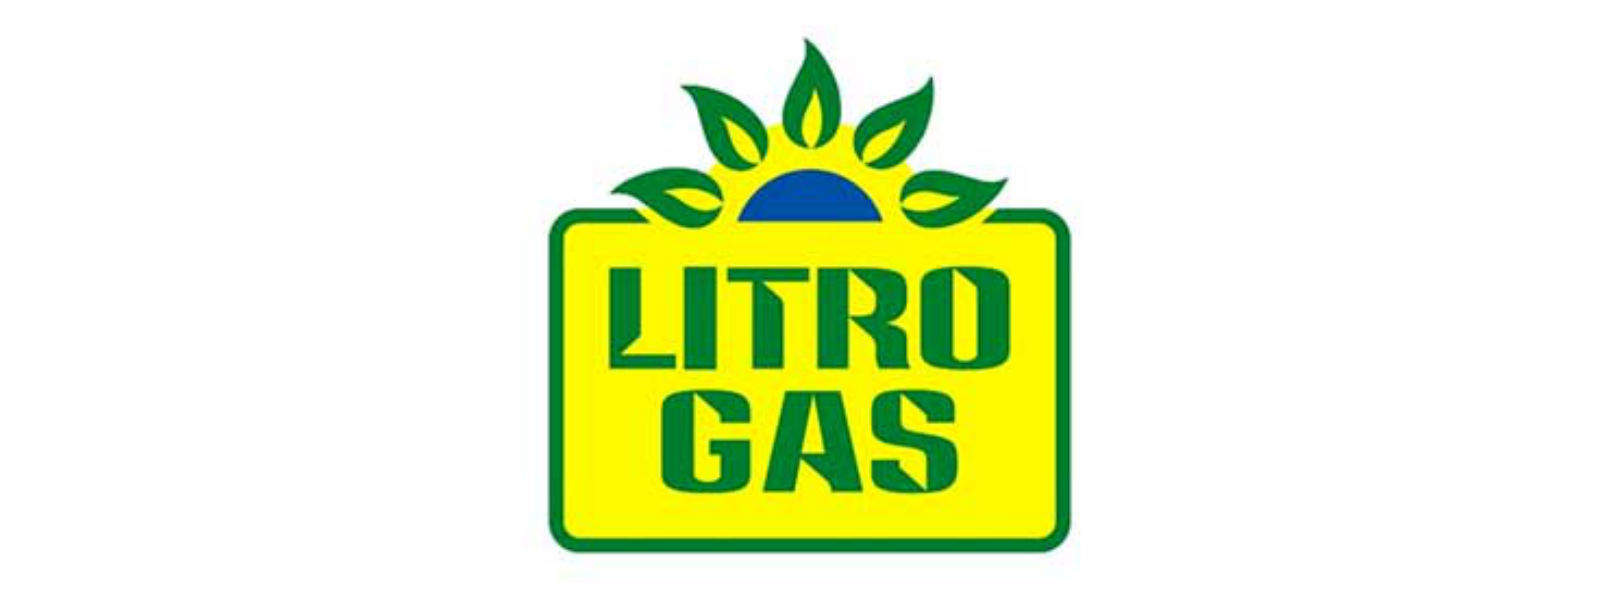 No proper mechanism at Litro to test for gas leaks